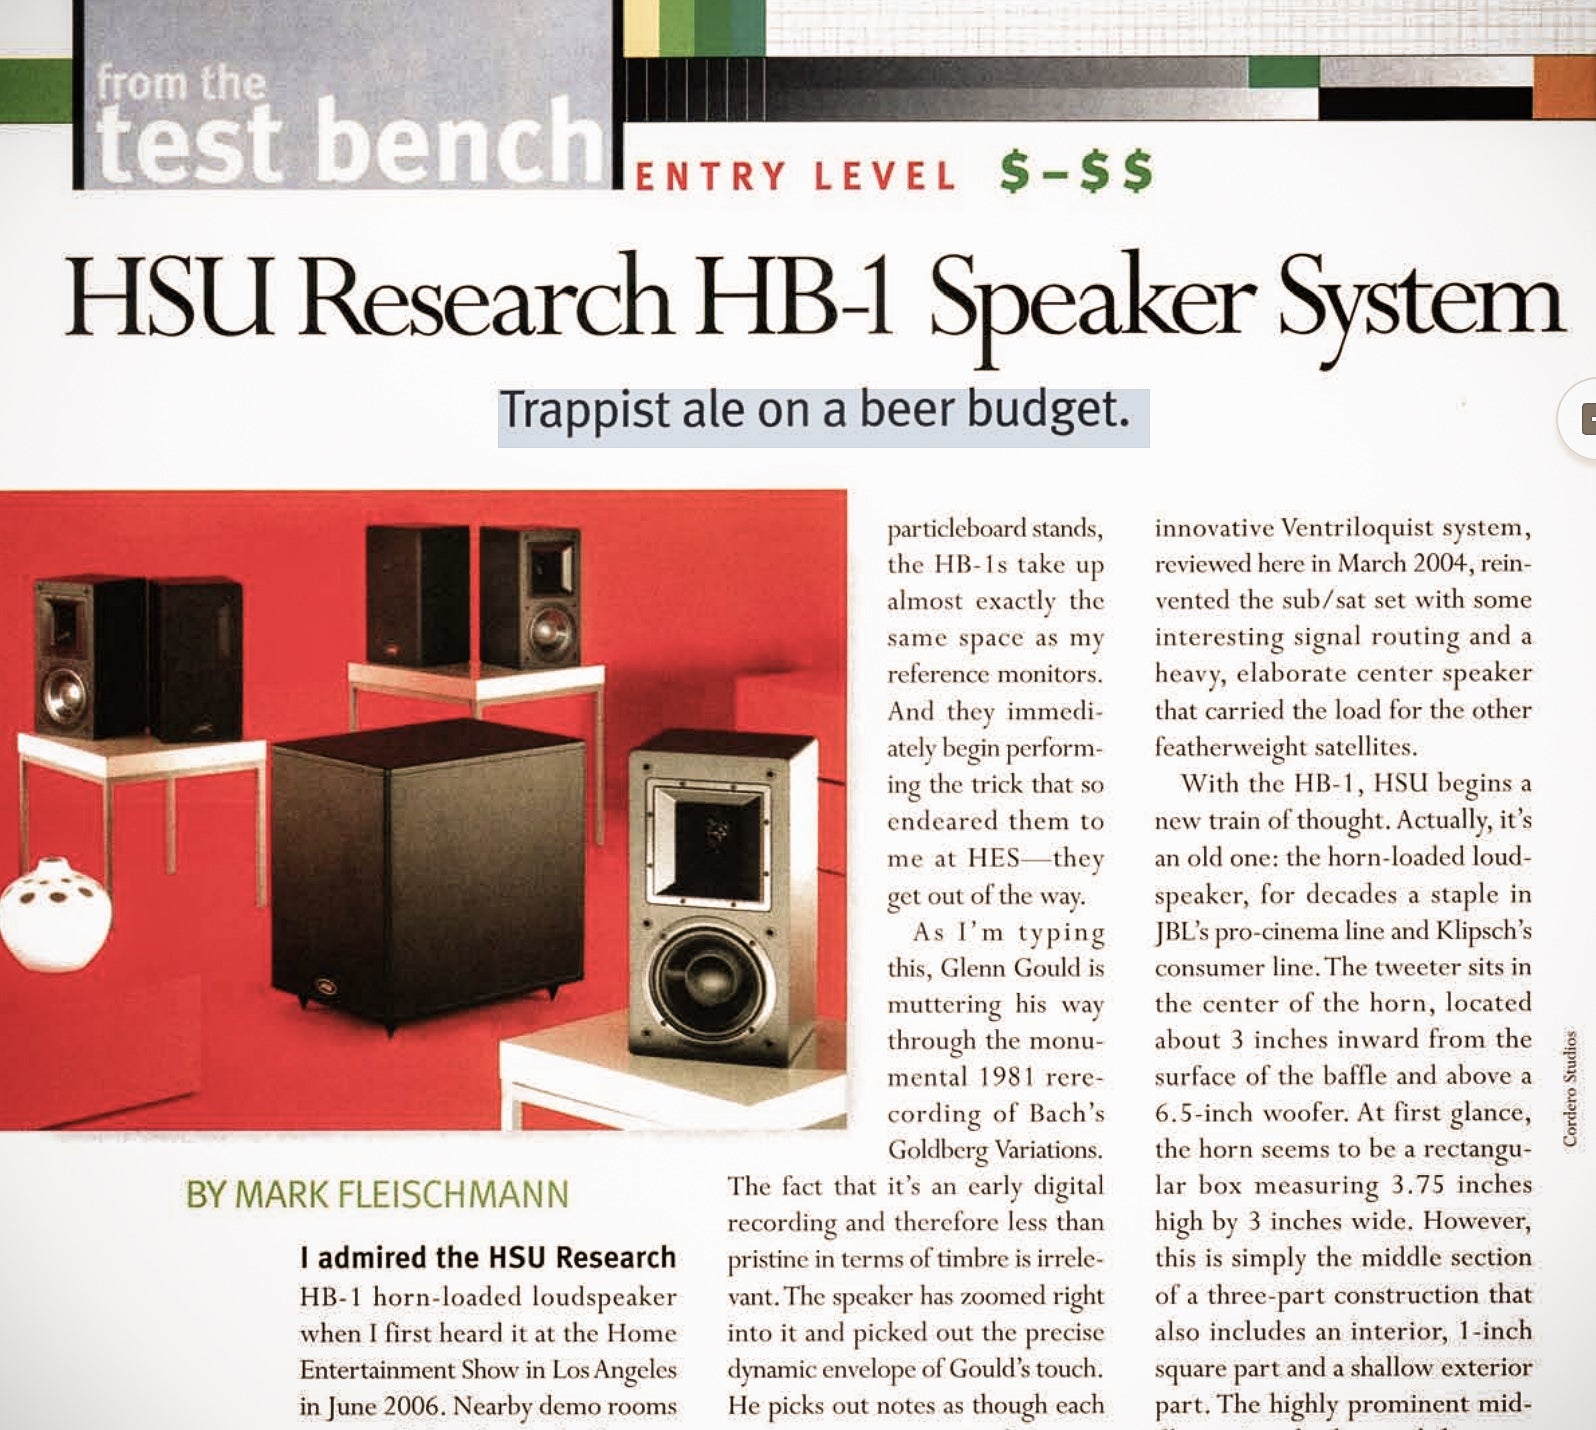 Home Theater Magazine Review 2007 - HB-1 Speakers: Dr. Hsu, Master of the Budget Sub, Moves into Budget Speaker Territory